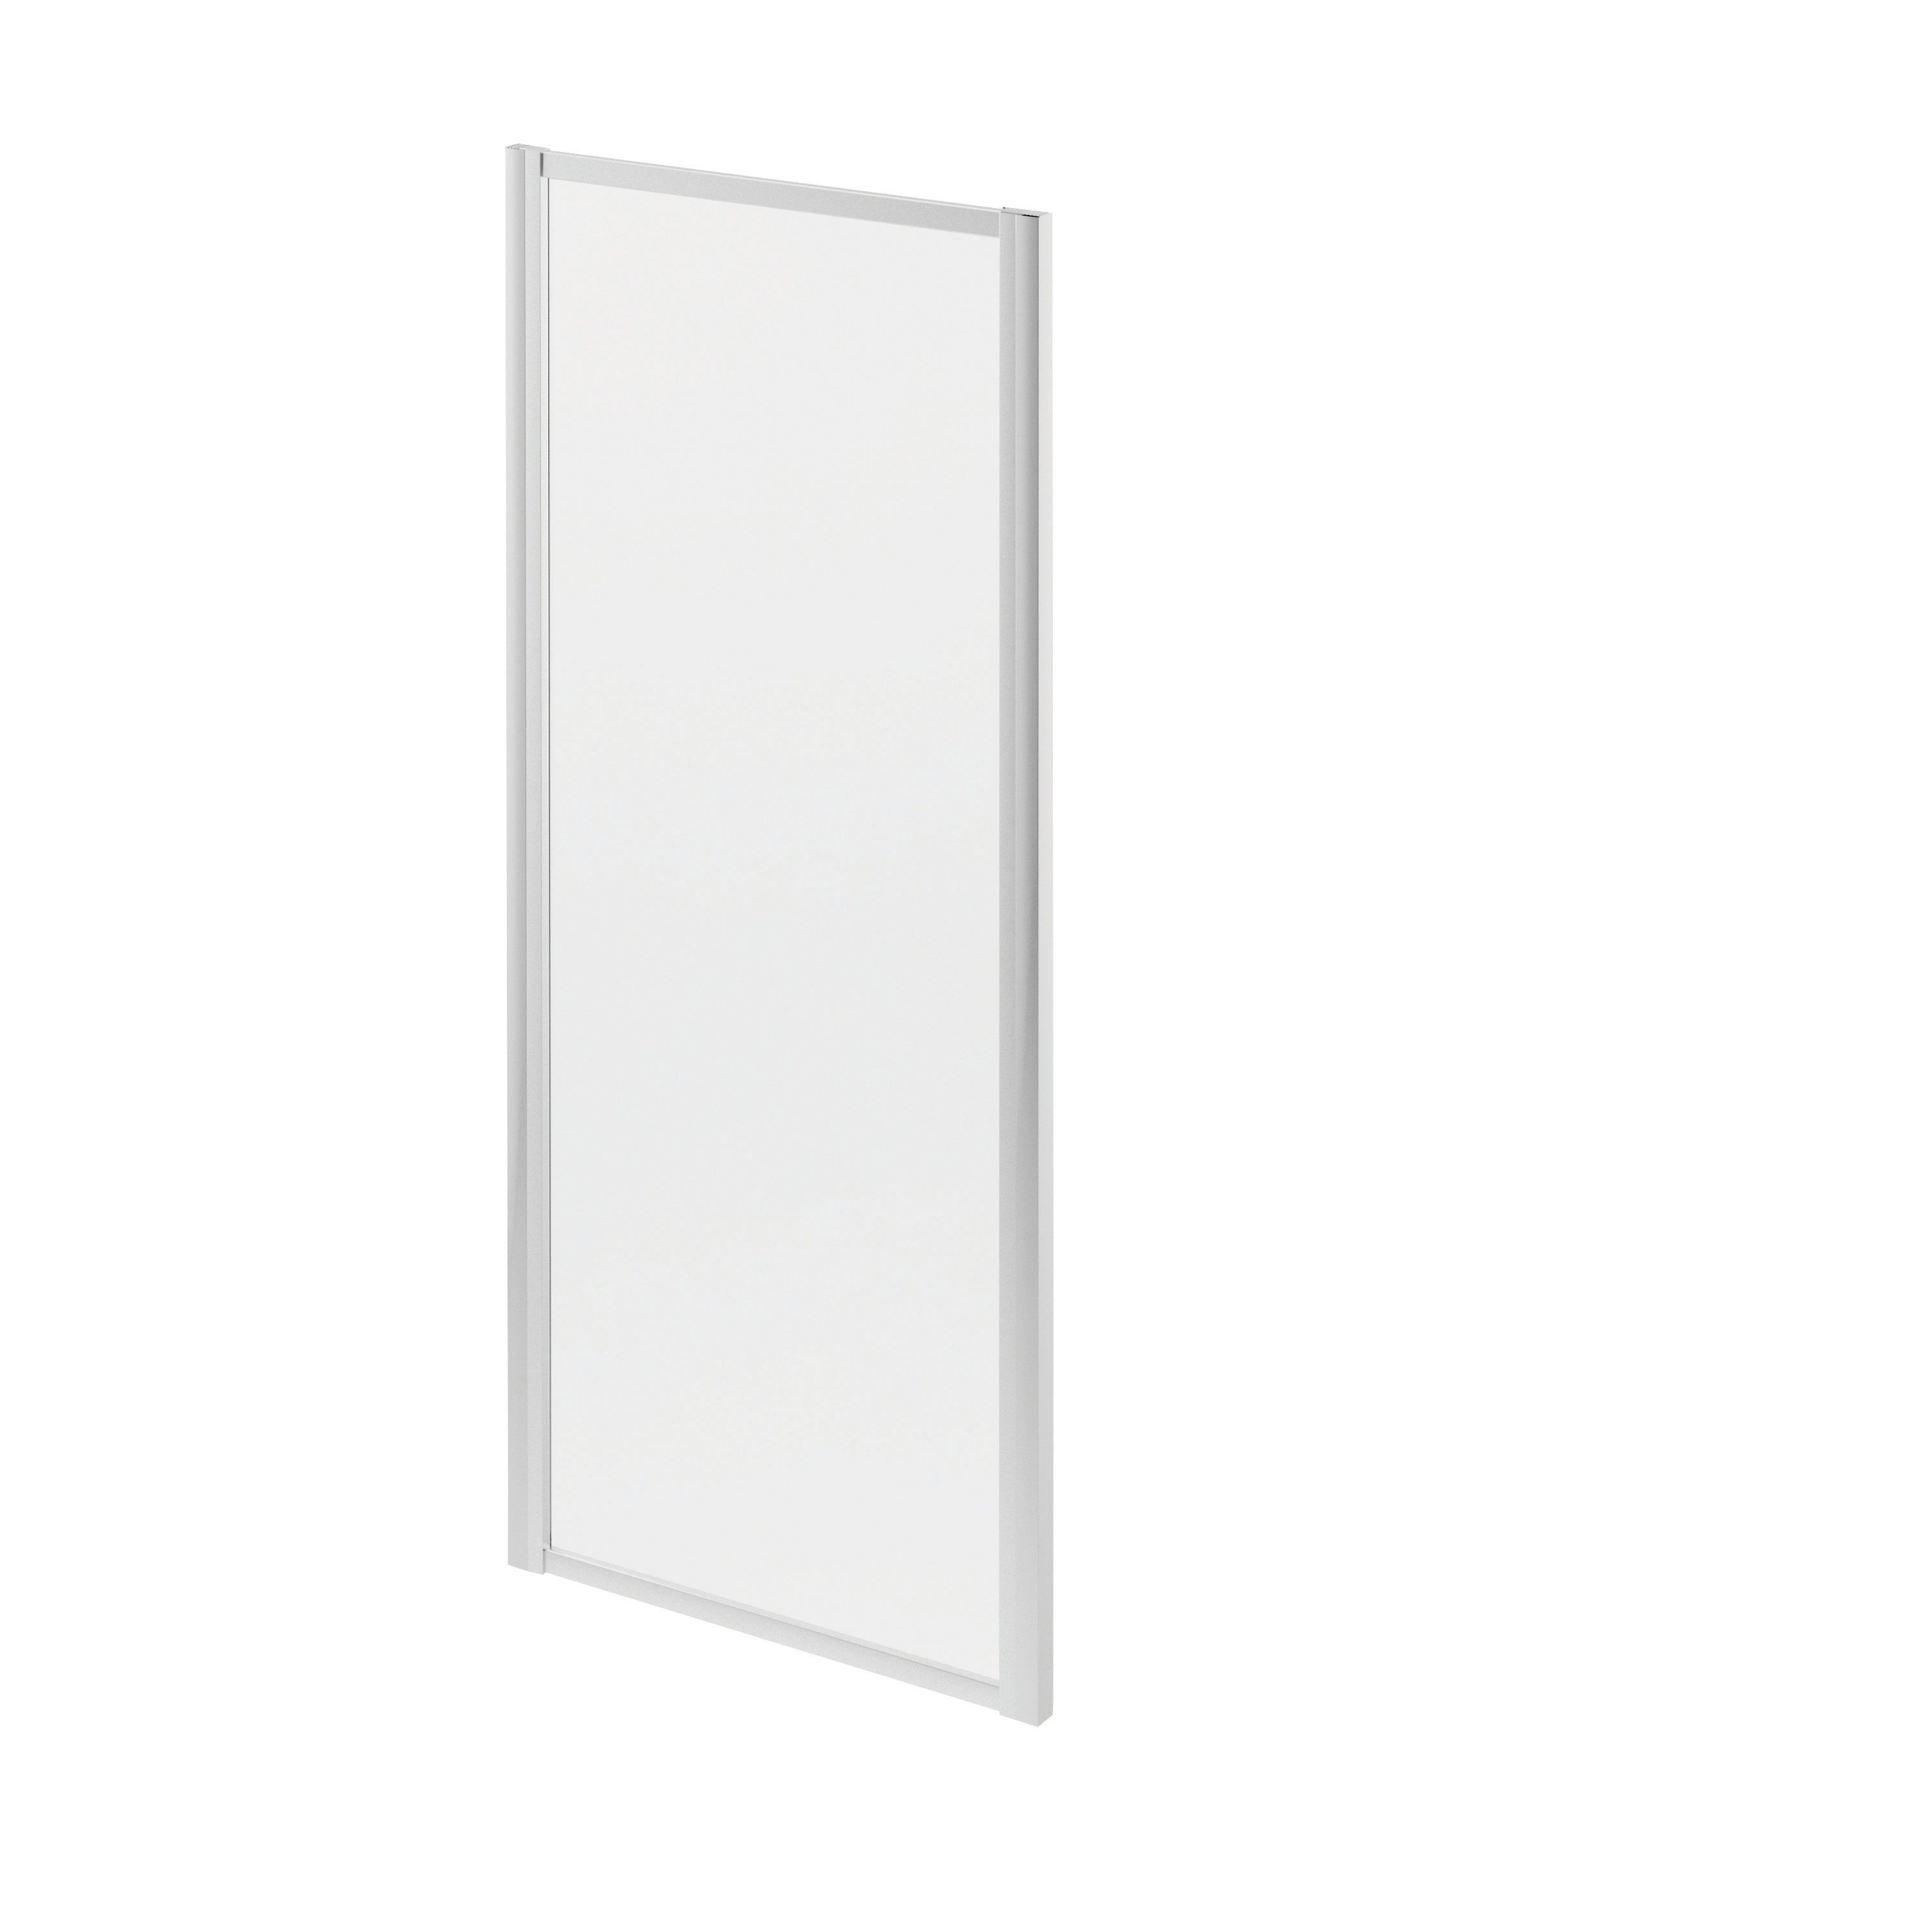 Image of Wickes 4mm Chrome Shower Side Panel Only - 1850 x 760mm